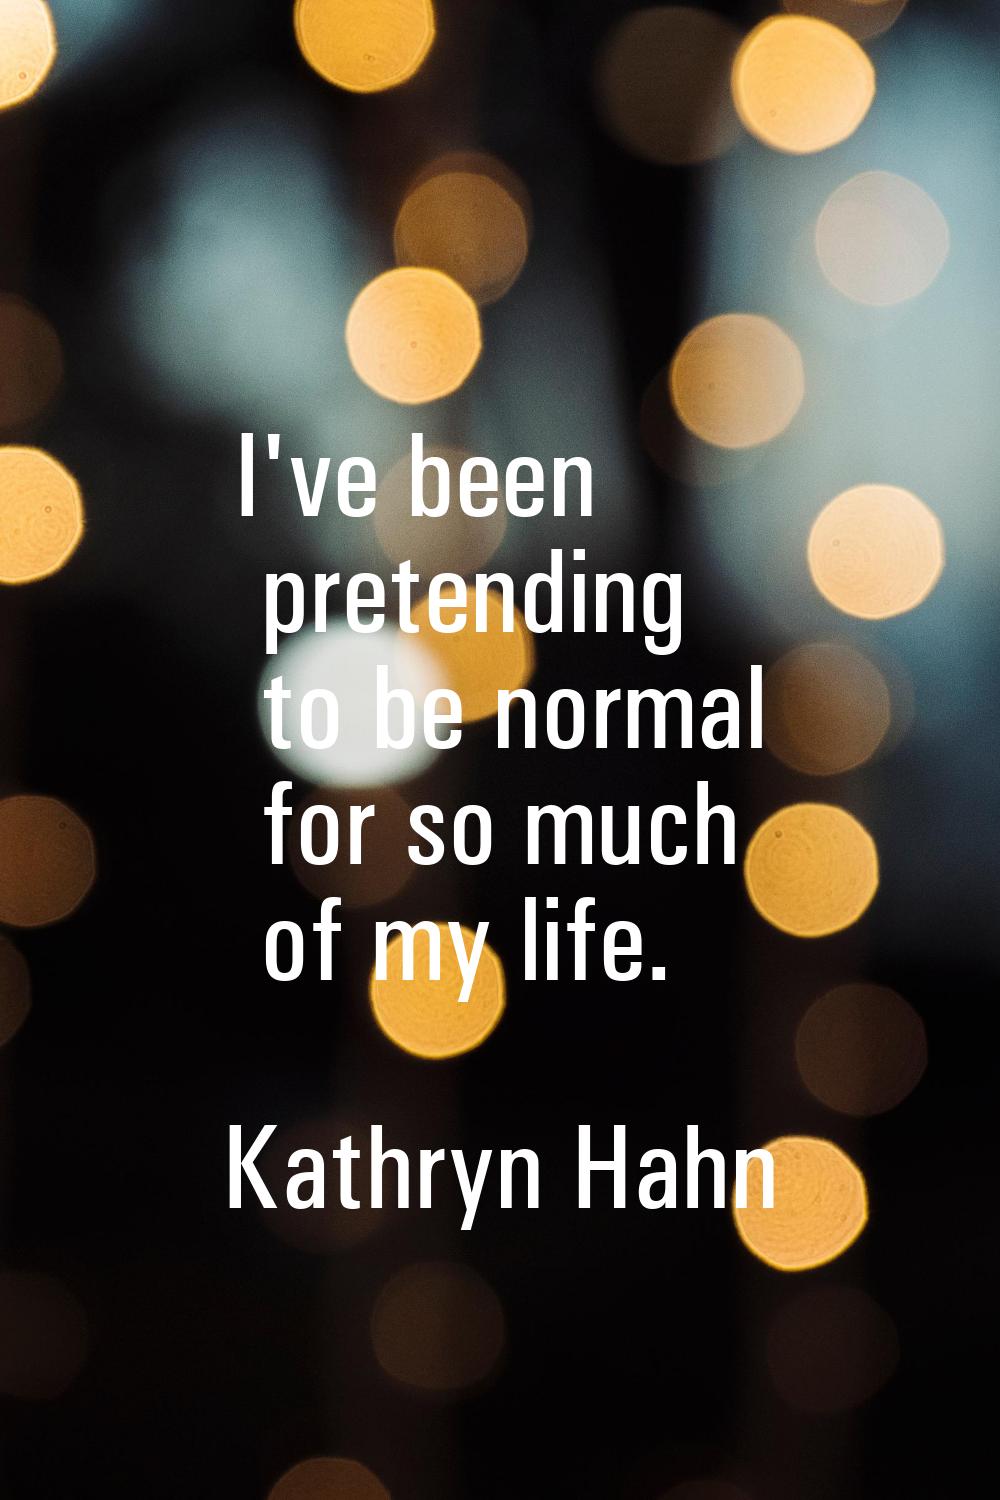 I've been pretending to be normal for so much of my life.